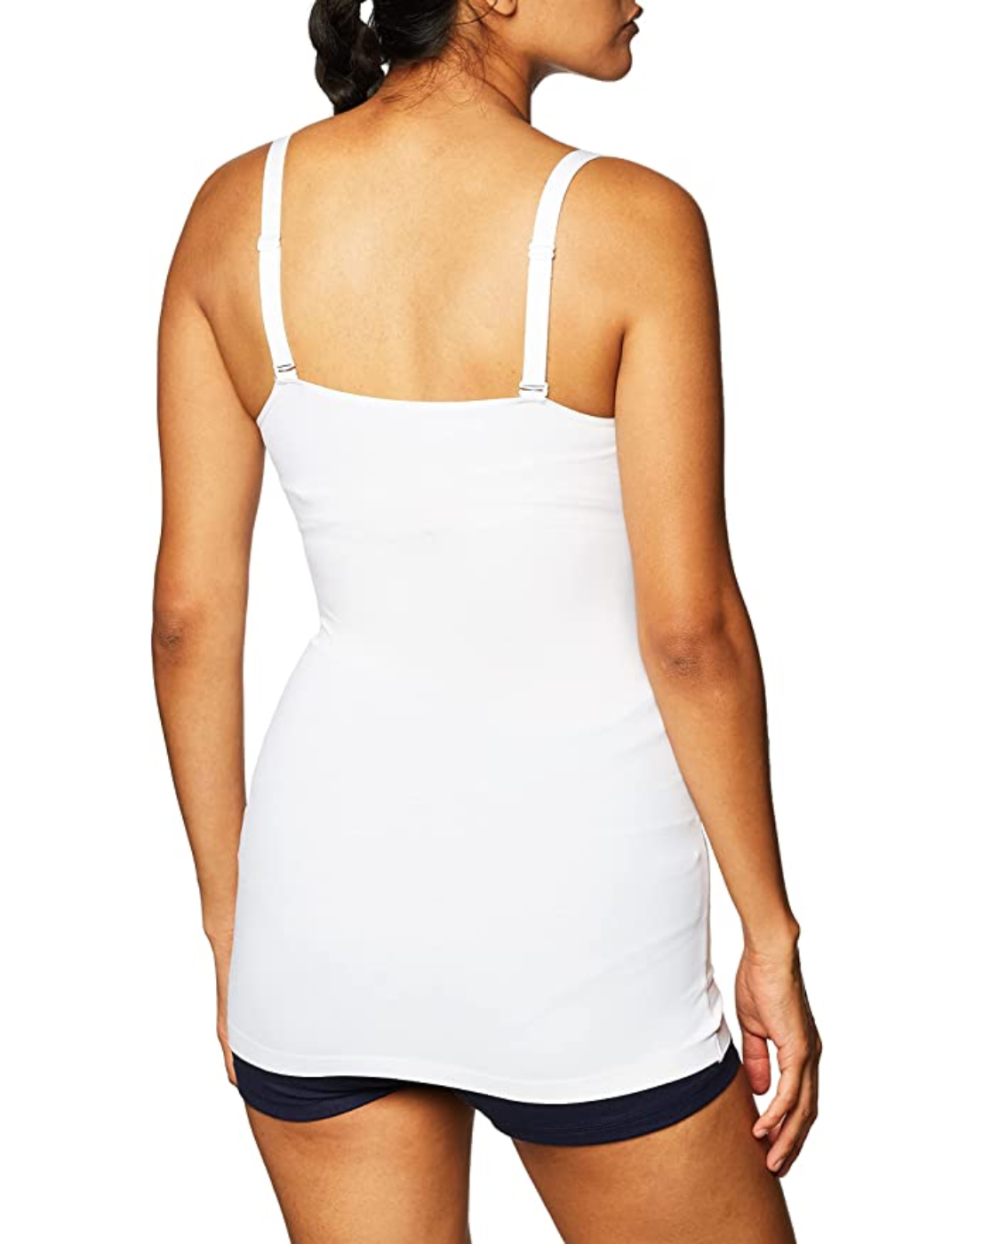 Maidenform Women's Cover Your Bases Smoothing Shapewear